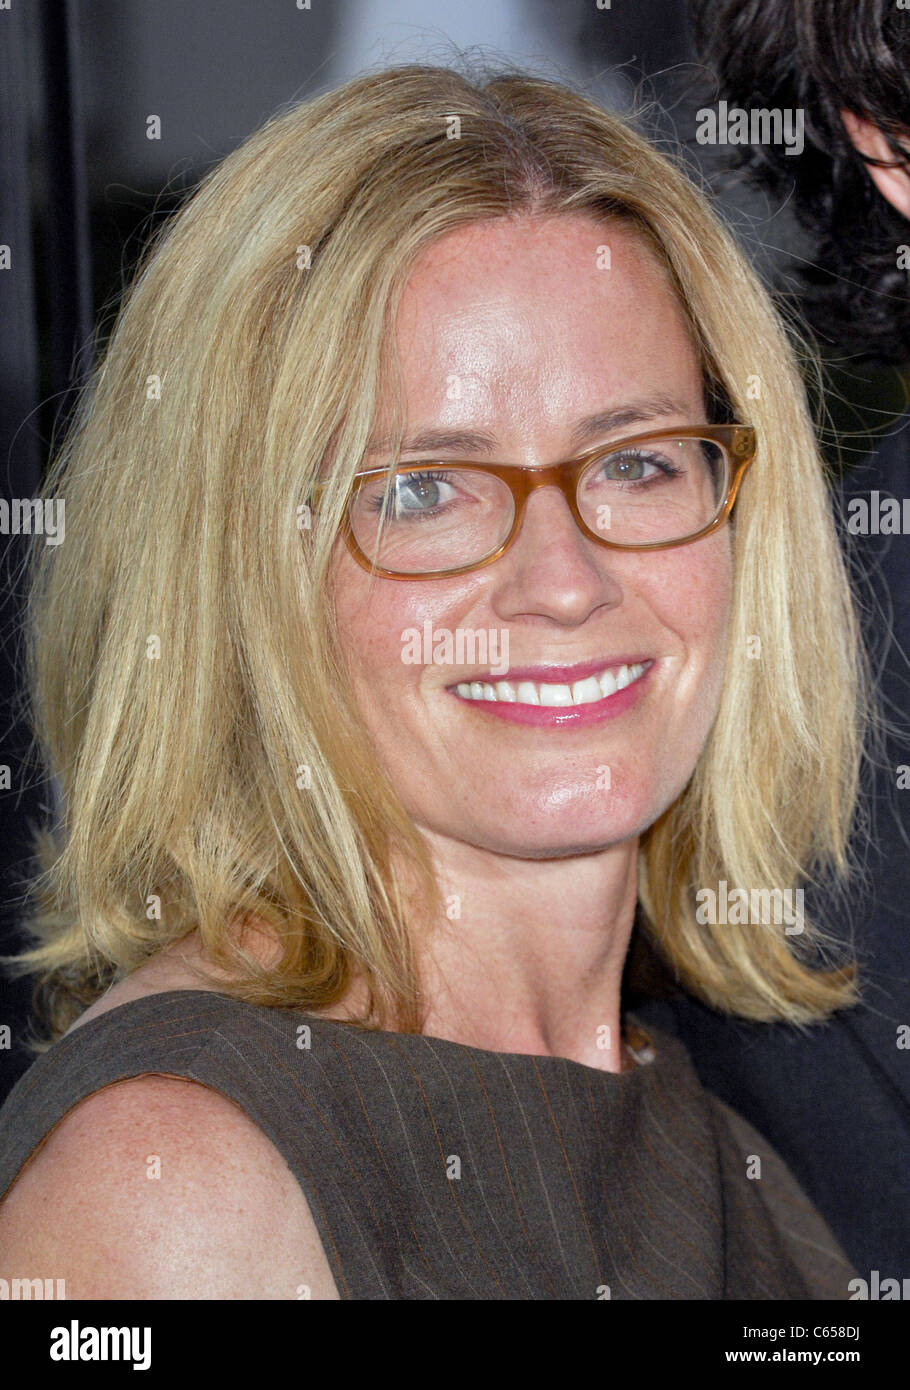 Elisabeth Shue at arrivals for WAITING FOR SUPERMAN Premiere, Paramount Theatre, Los Angeles, CA September 20, 2010. Photo By: Elizabeth Goodenough/Everett Collection Stock Photo